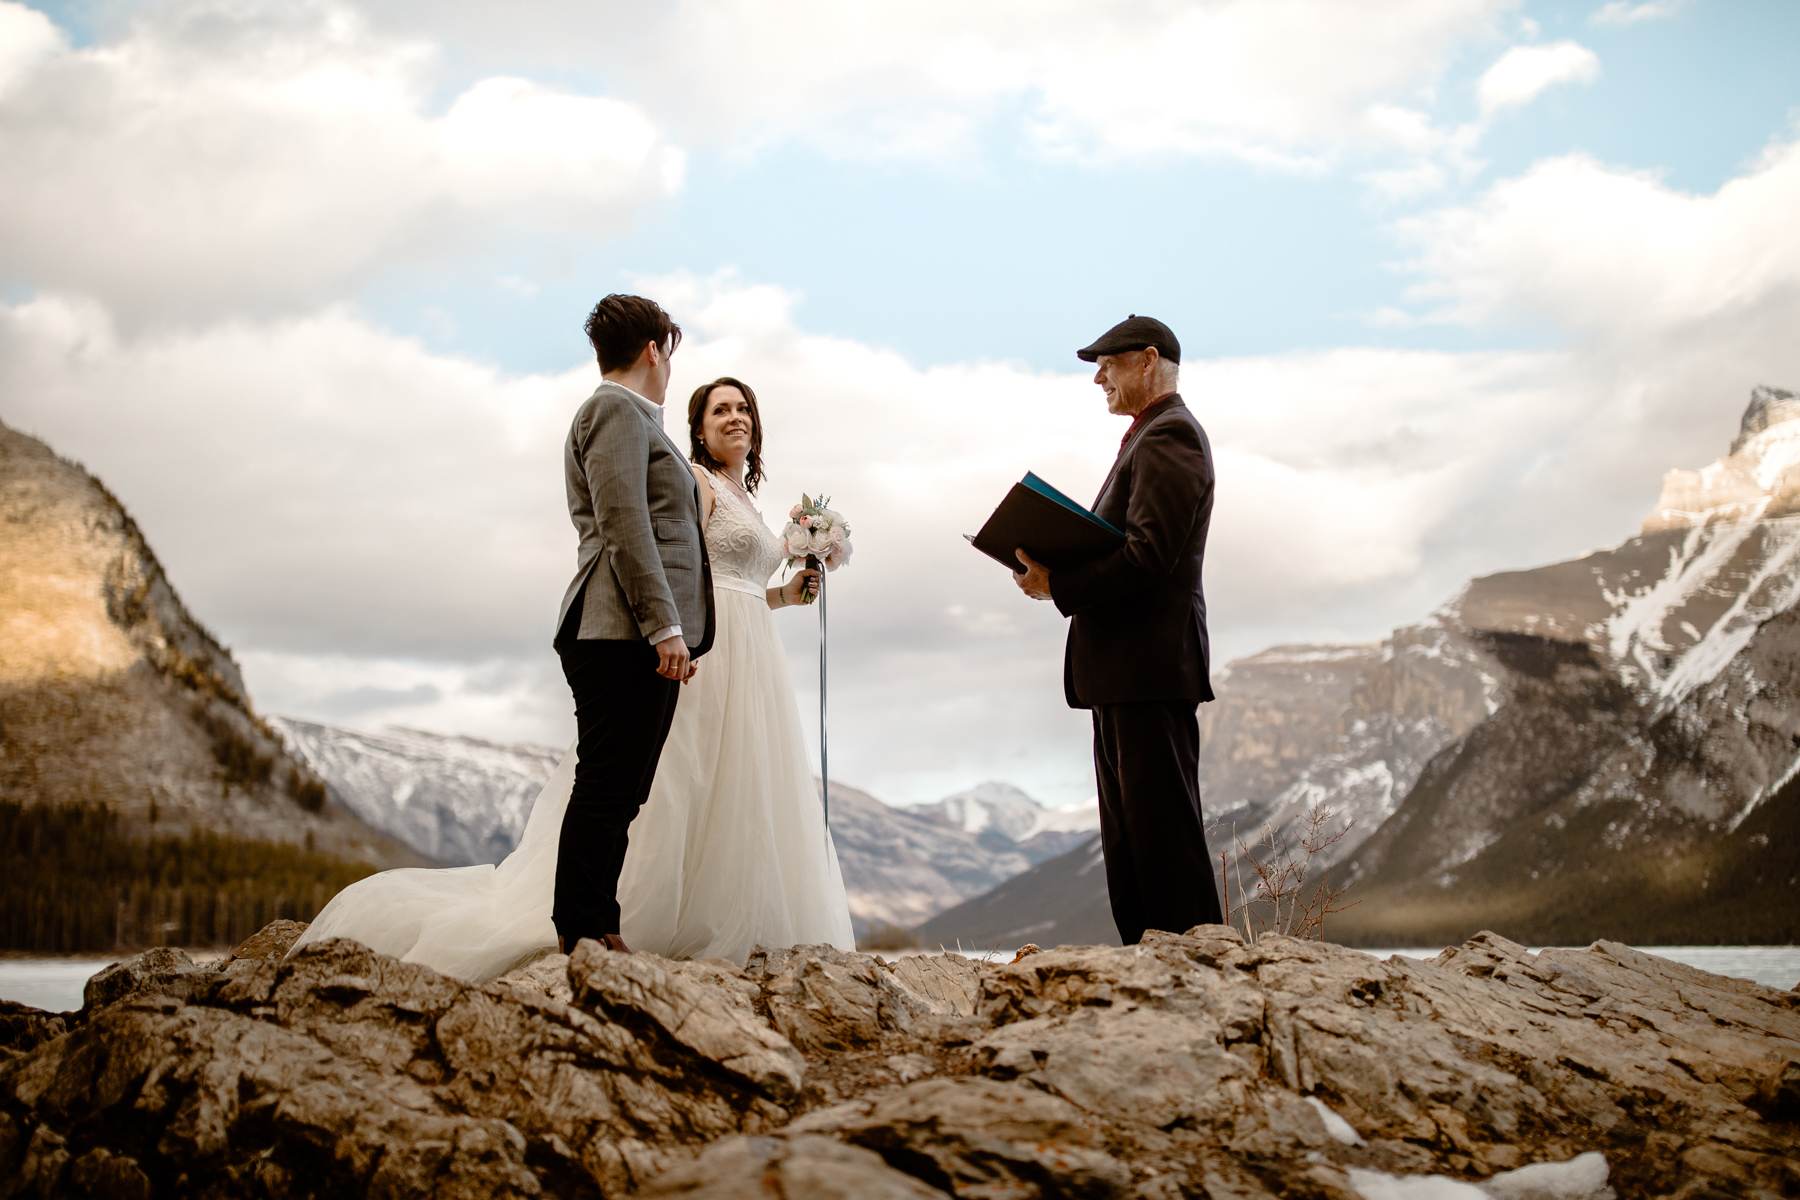 Banff National Park Elopement Photography with LGBTQ-friendly photographers - Image 17